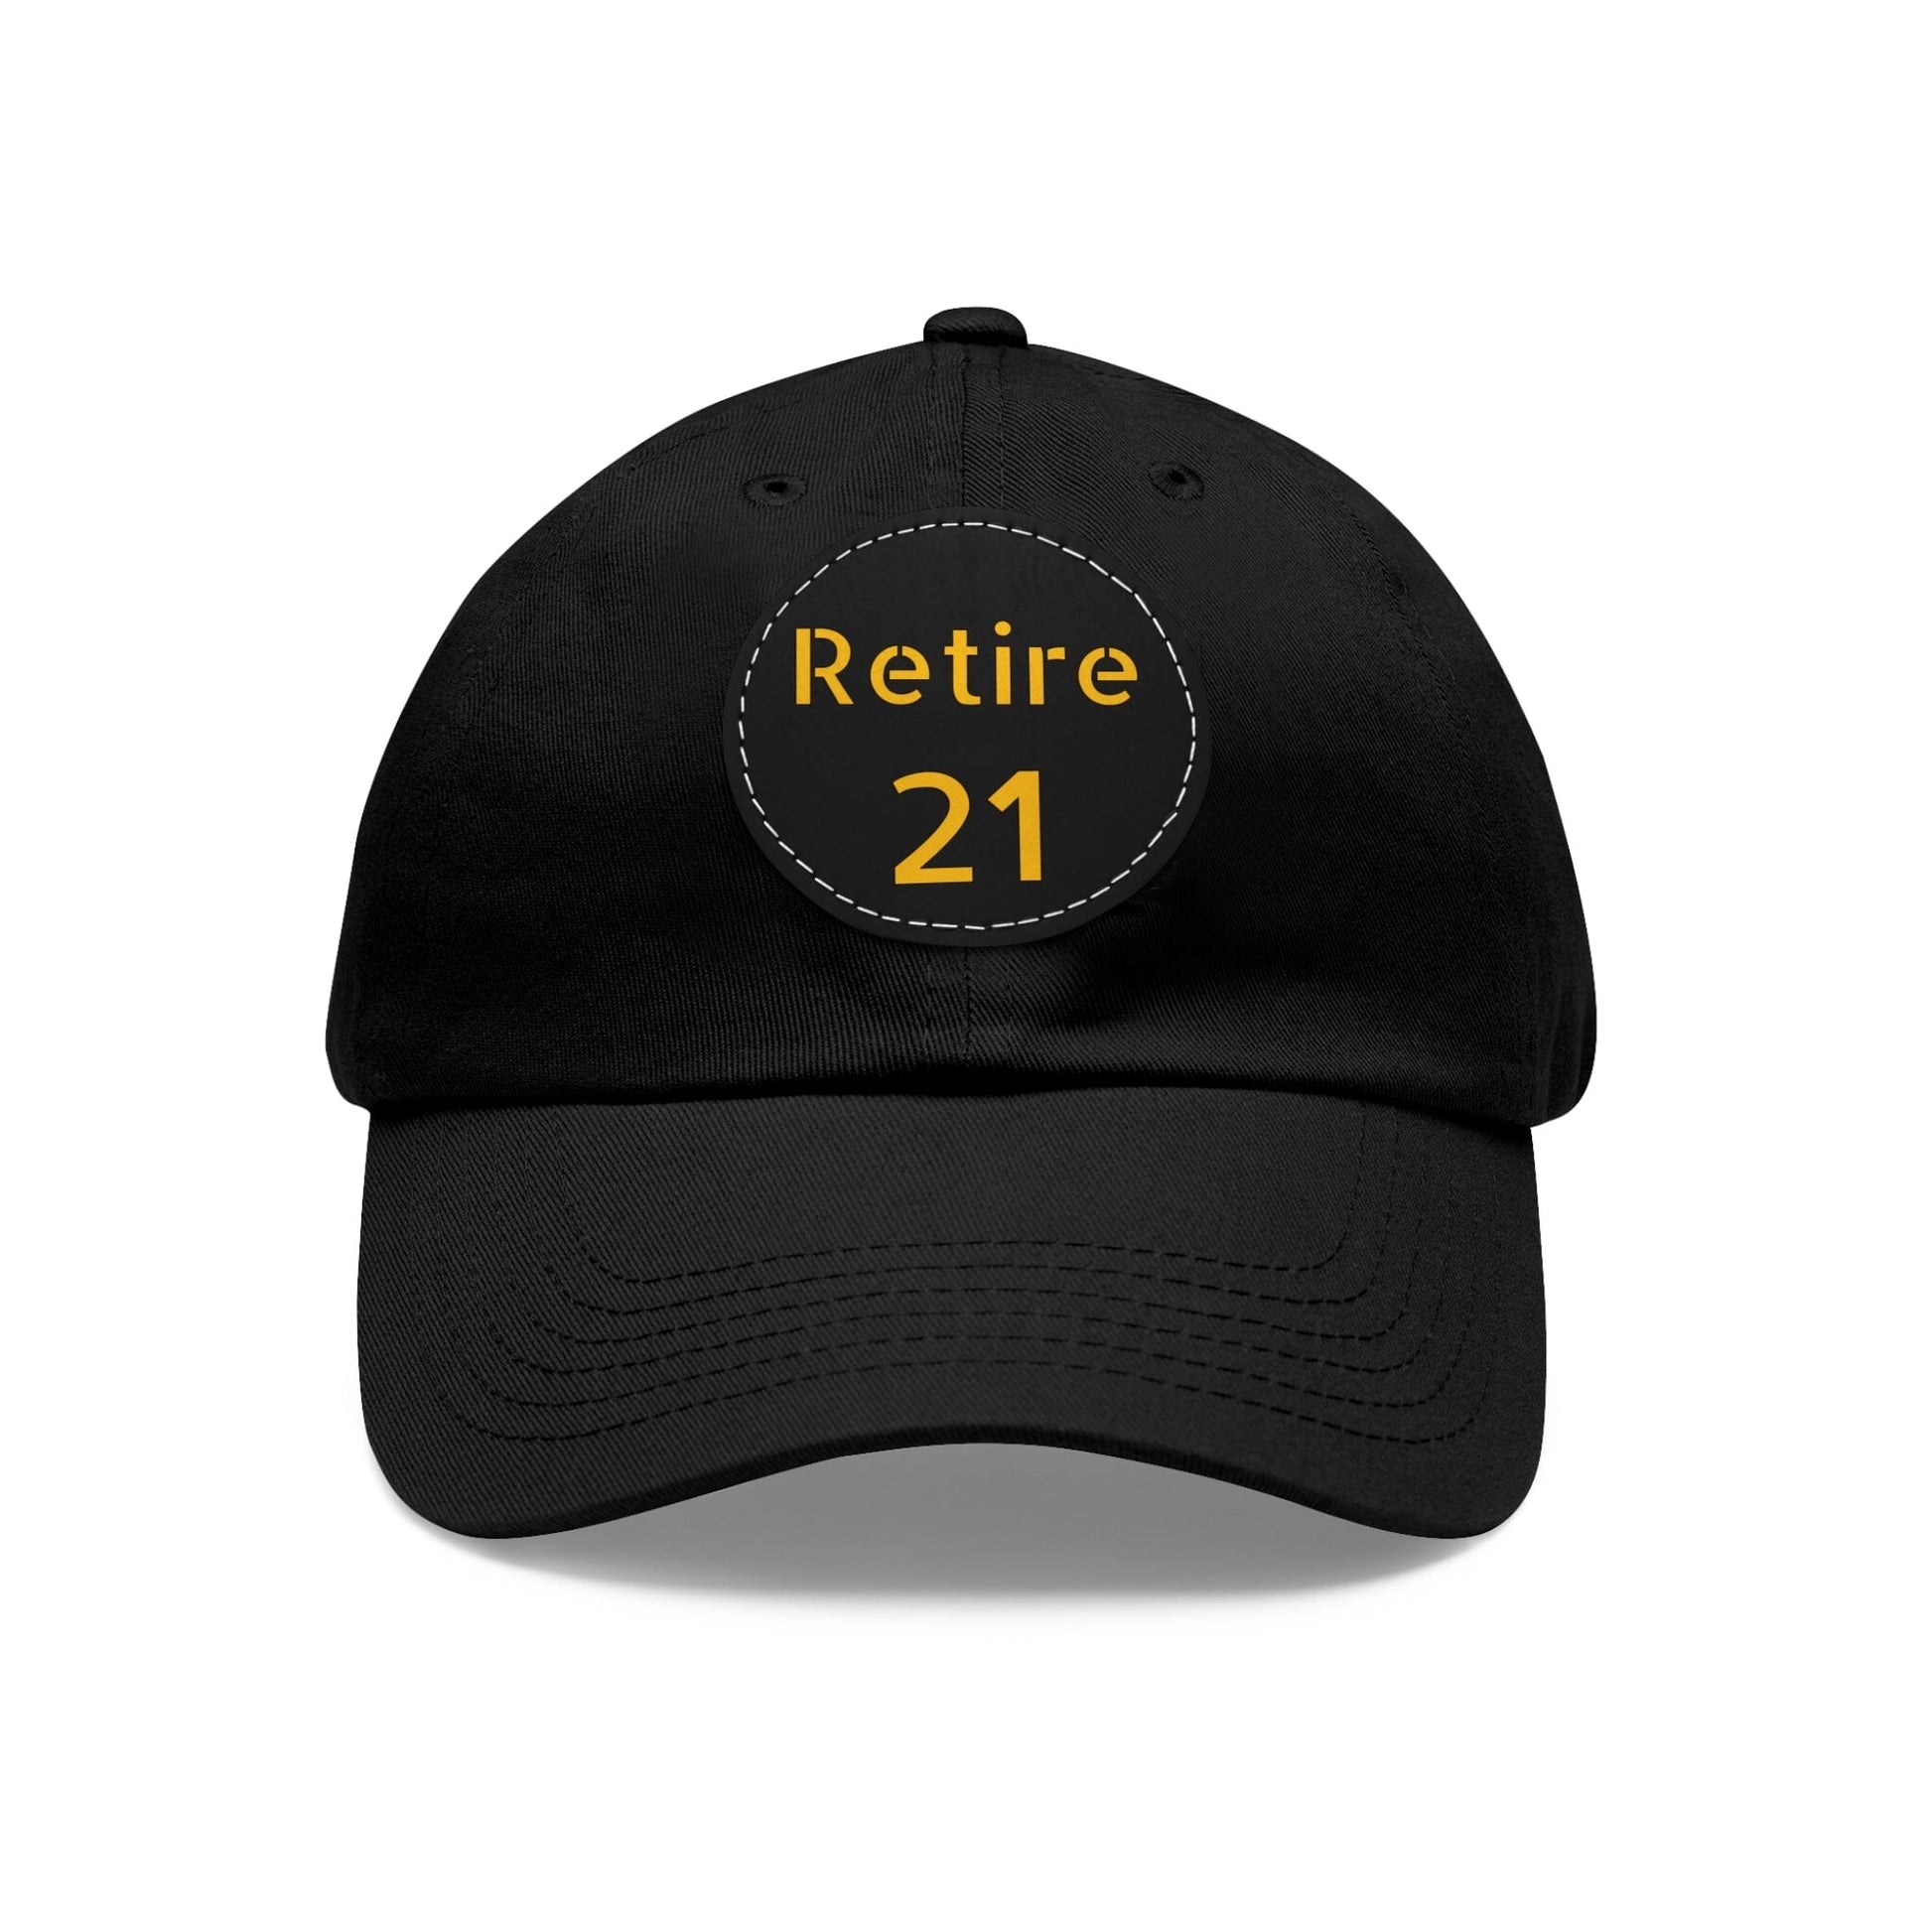 Retire 21 Hat With Leather Patch Hats Yinzergear Black / Black patch Circle One size